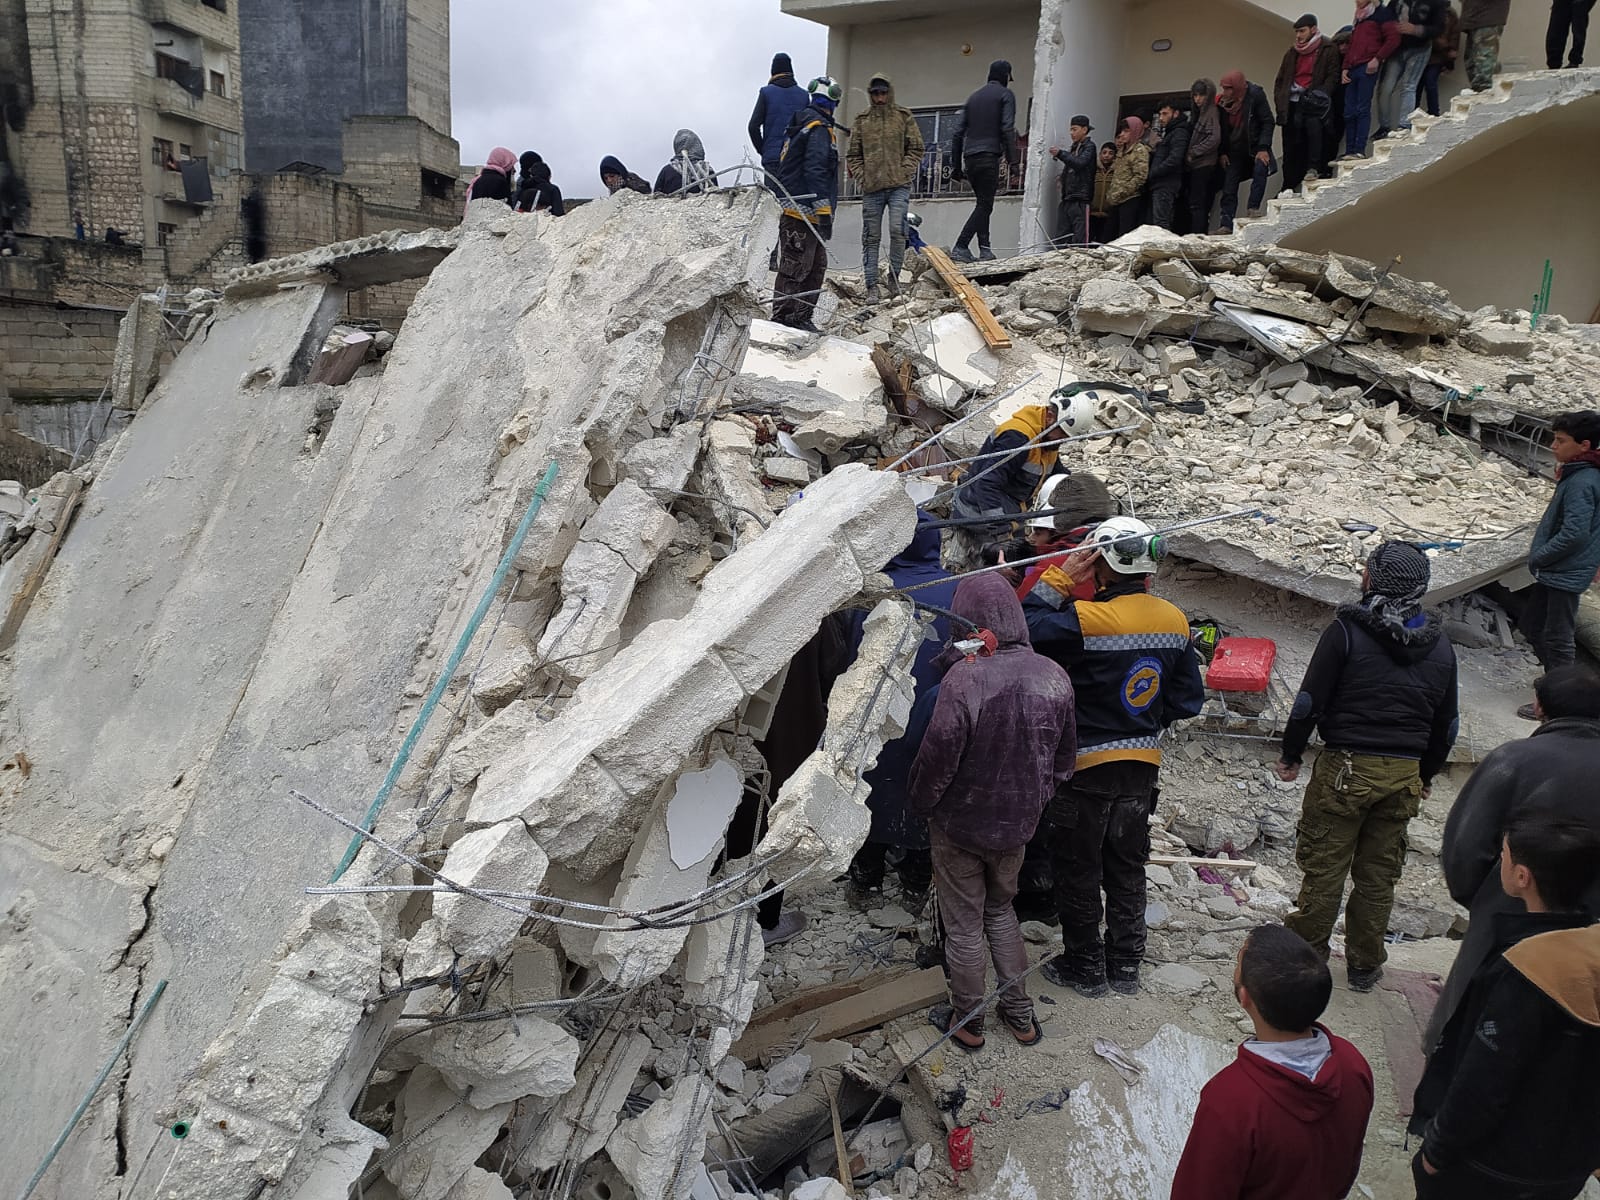 First responders and the public searching for people amongst the rubble of buildings flattened by the earthquake in Syria and Turkey